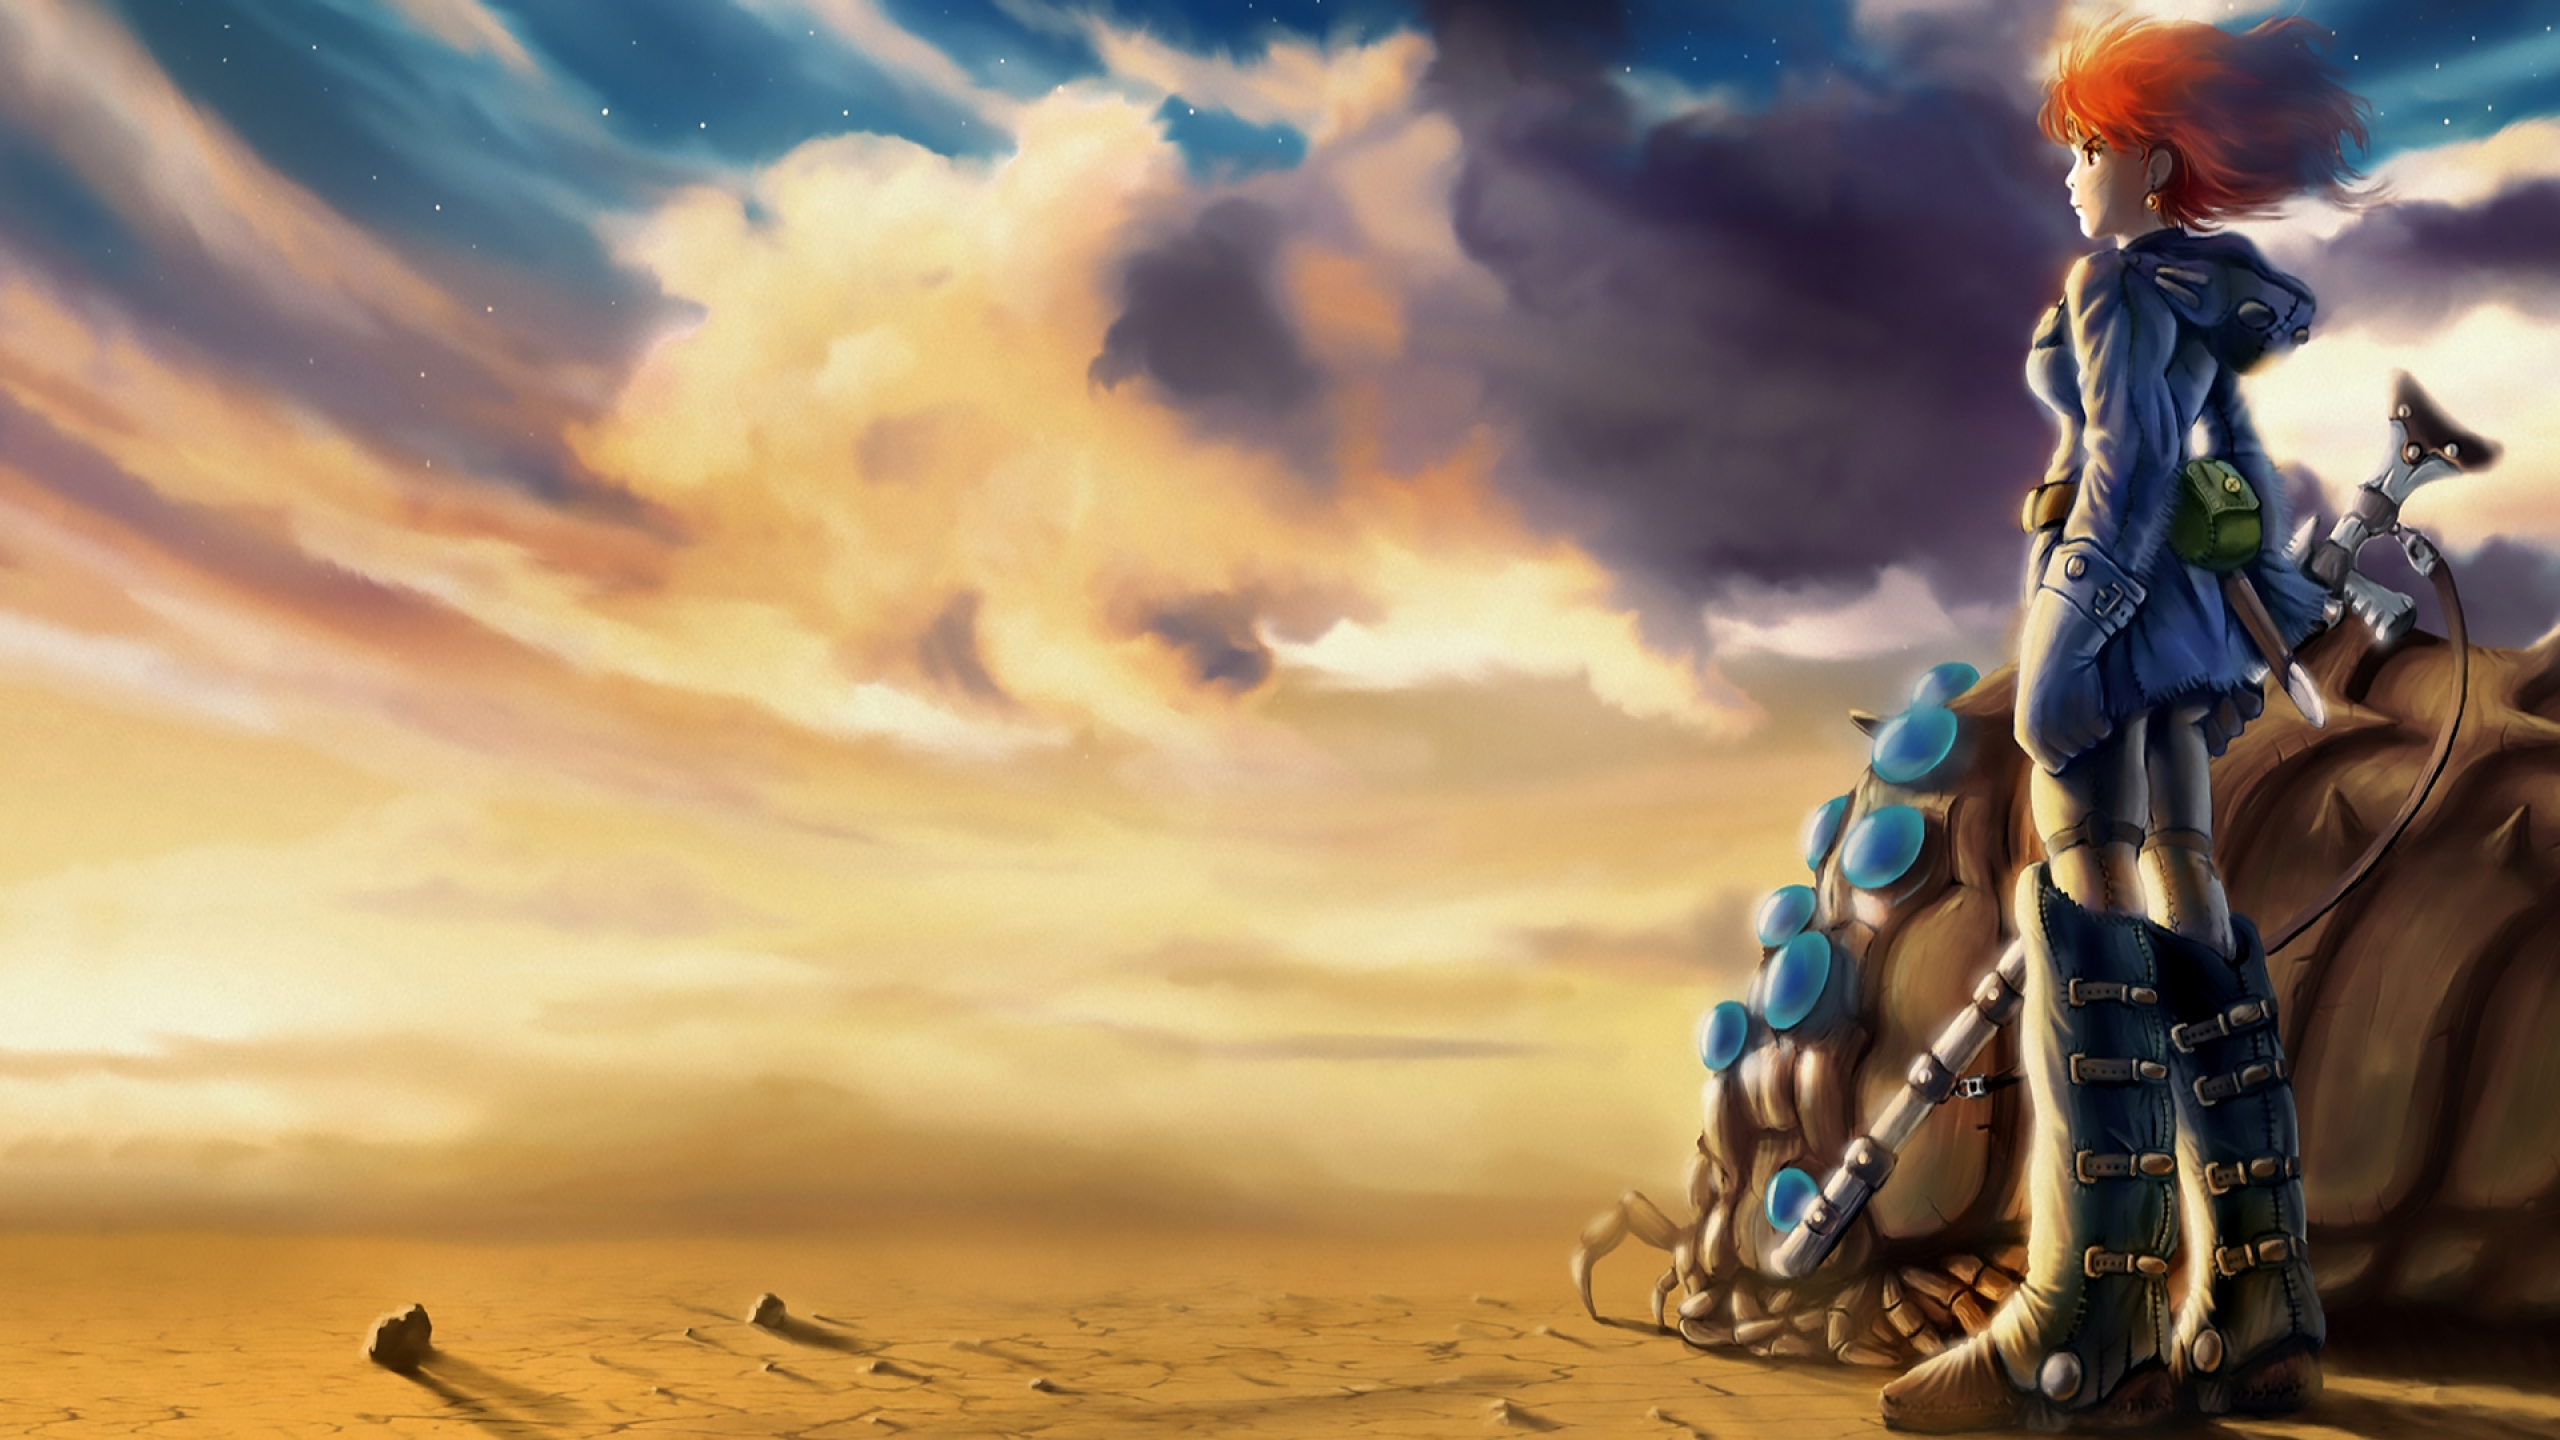 2560x1440 Nausicaa Of The Valley Of The Wind Nausicaa Desert Images, Photos, Reviews